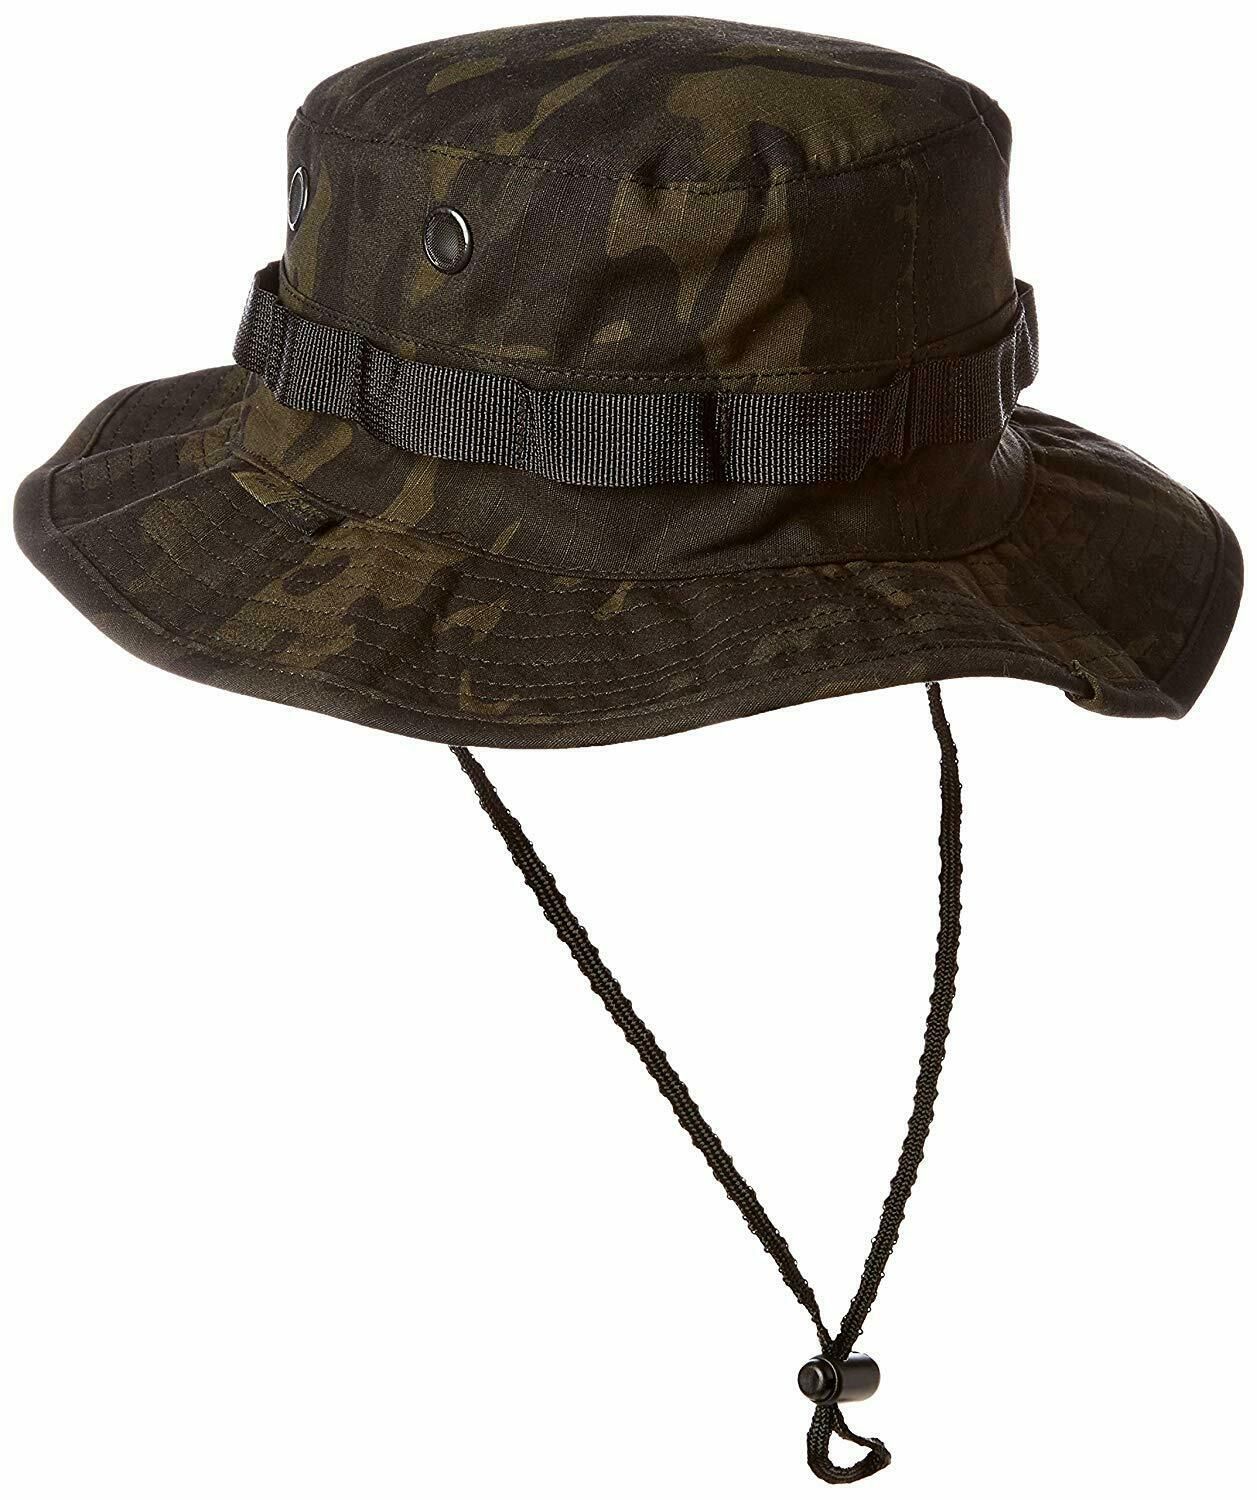 Tru-Spec Military Style Boonie, Multi Camouflage Black, Size 7 ,Fishing ,Camping